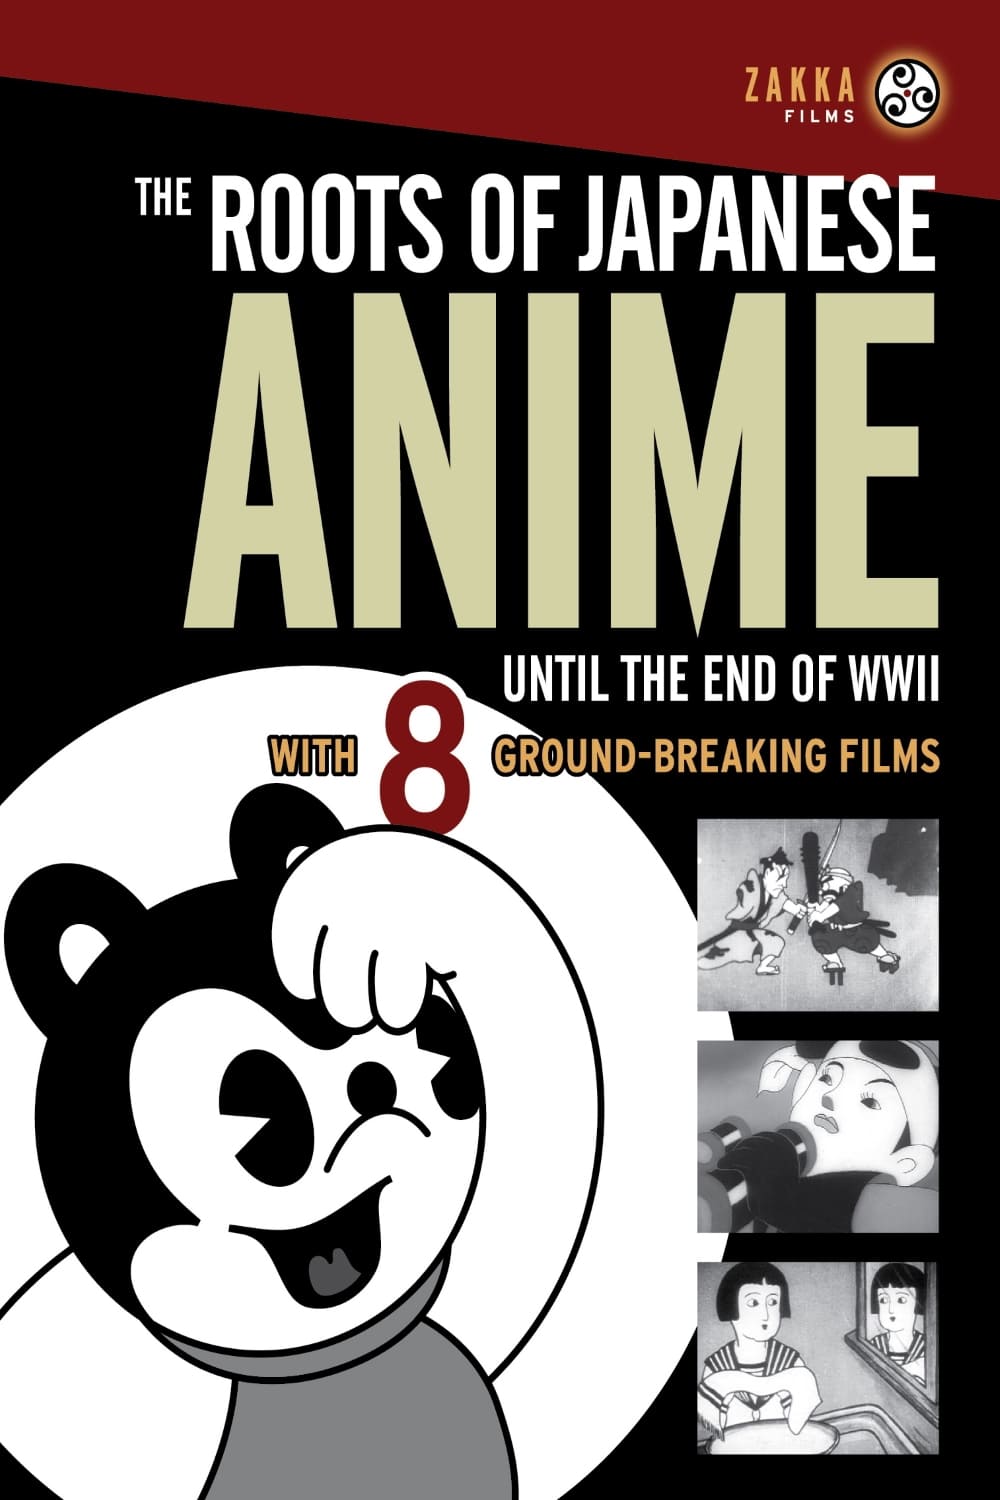 The Roots of Japanese Anime Until the End of WWII: 1930-1942